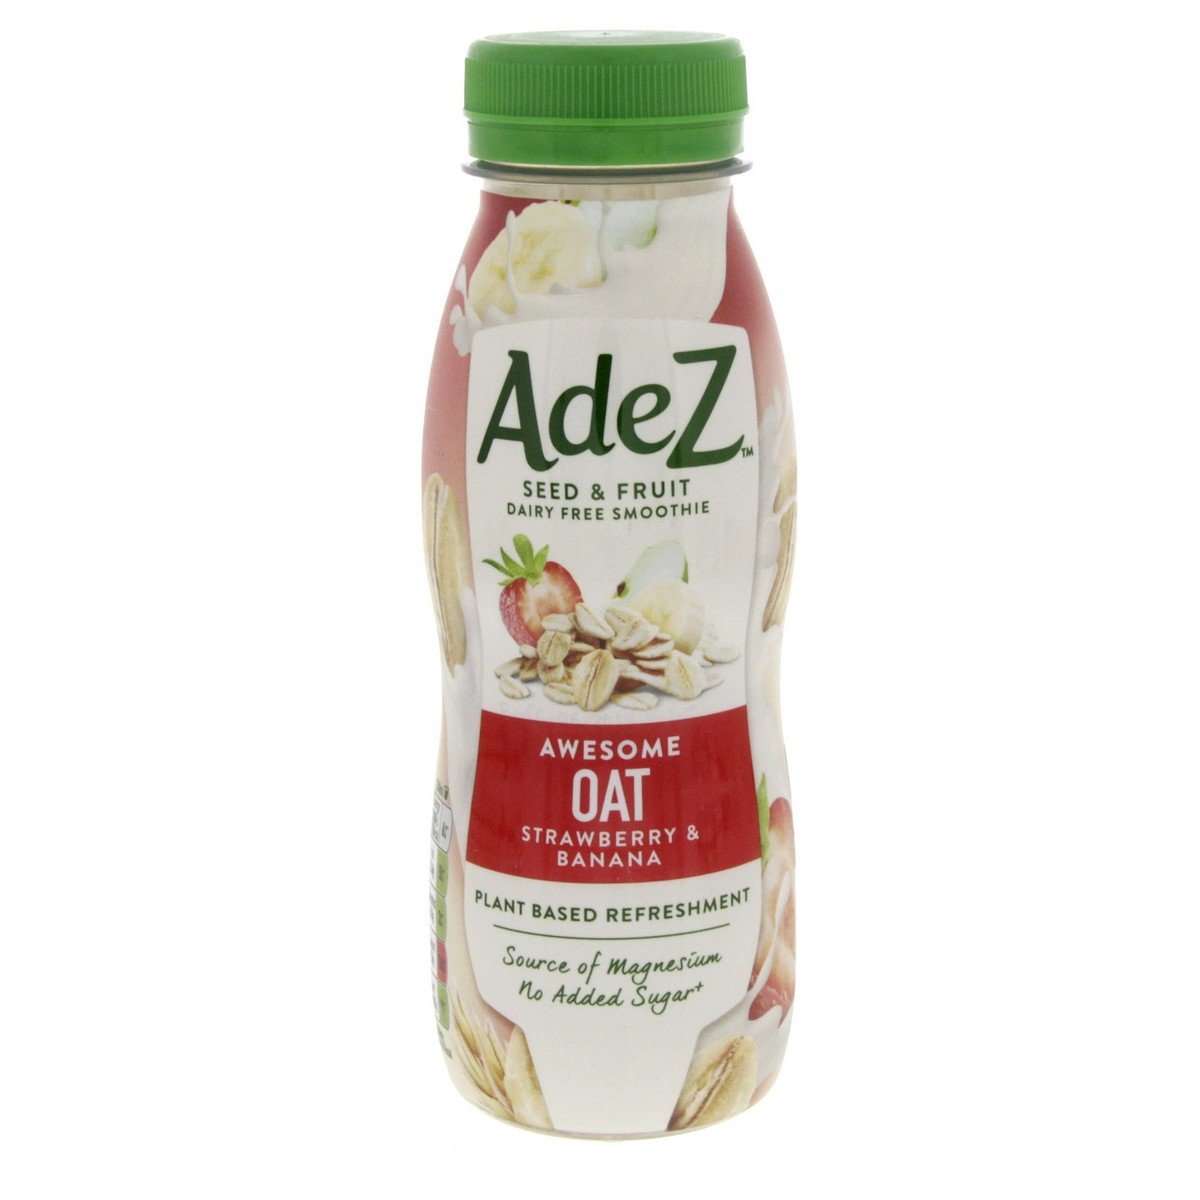 Adez Seed And Fruit Diary Free Smoothie Awesome Oat Strawberry And Banana 250 ml